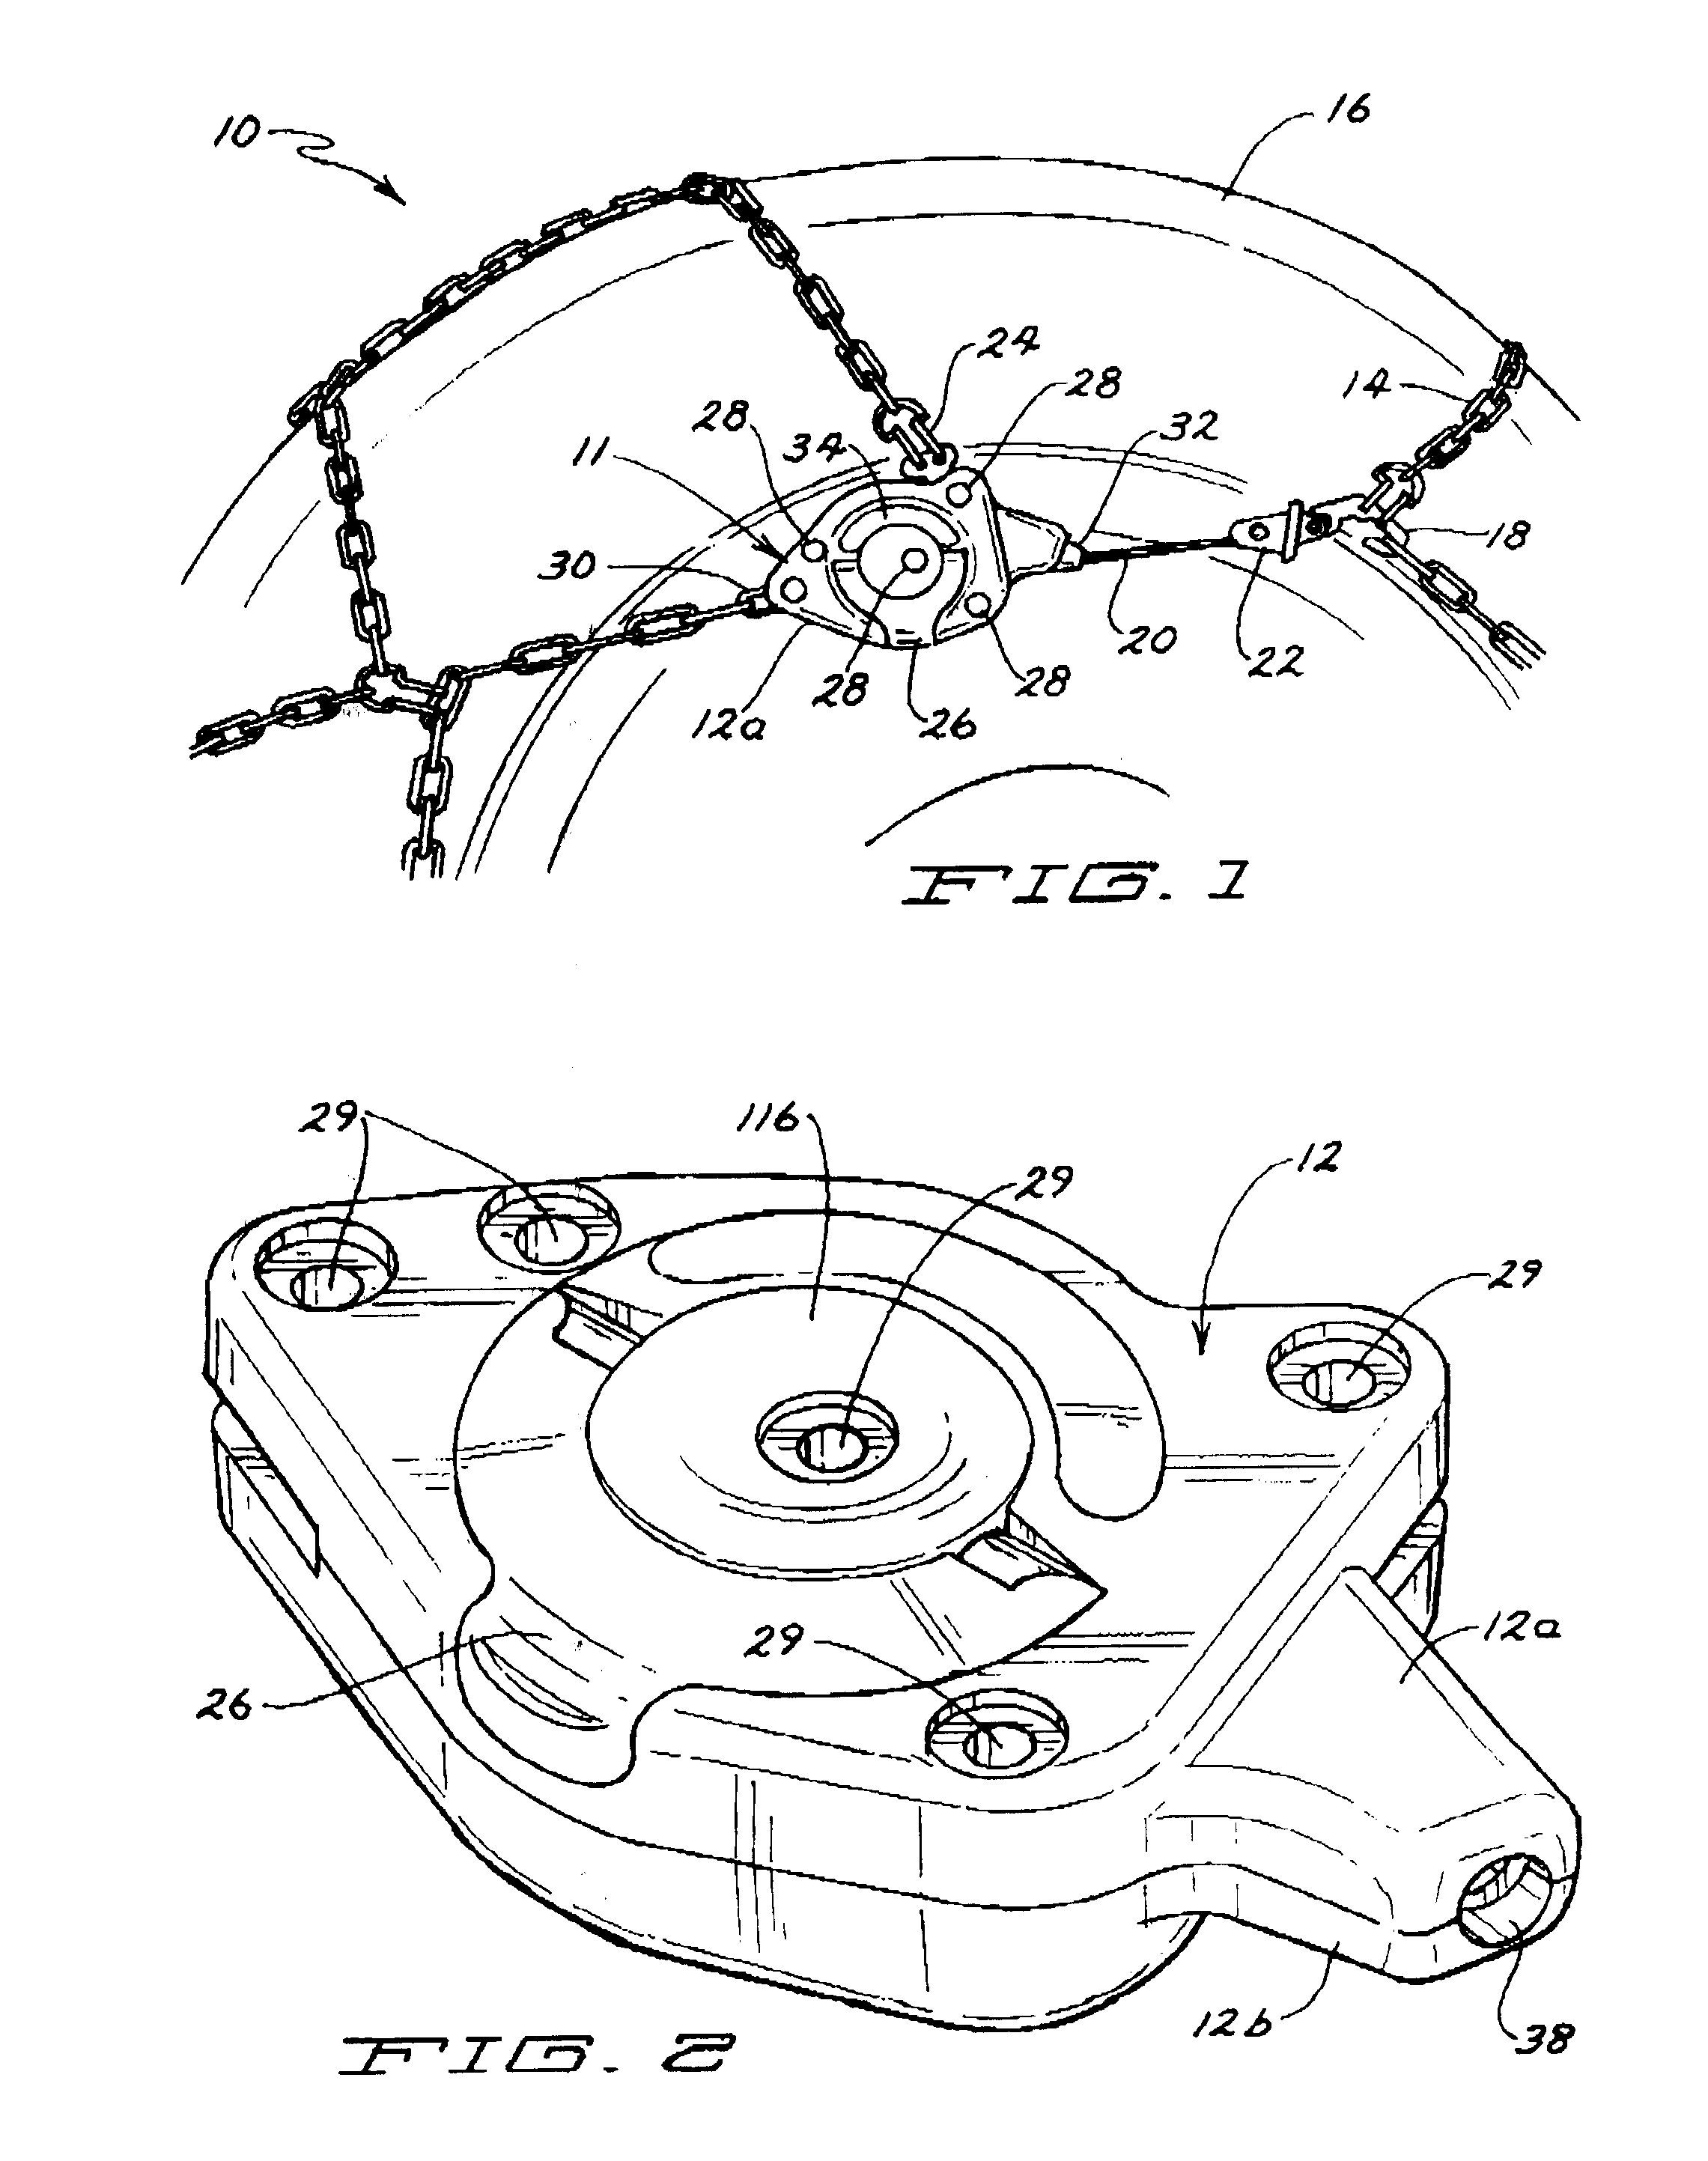 Self-Tightening Snow Chain and Methods of Use